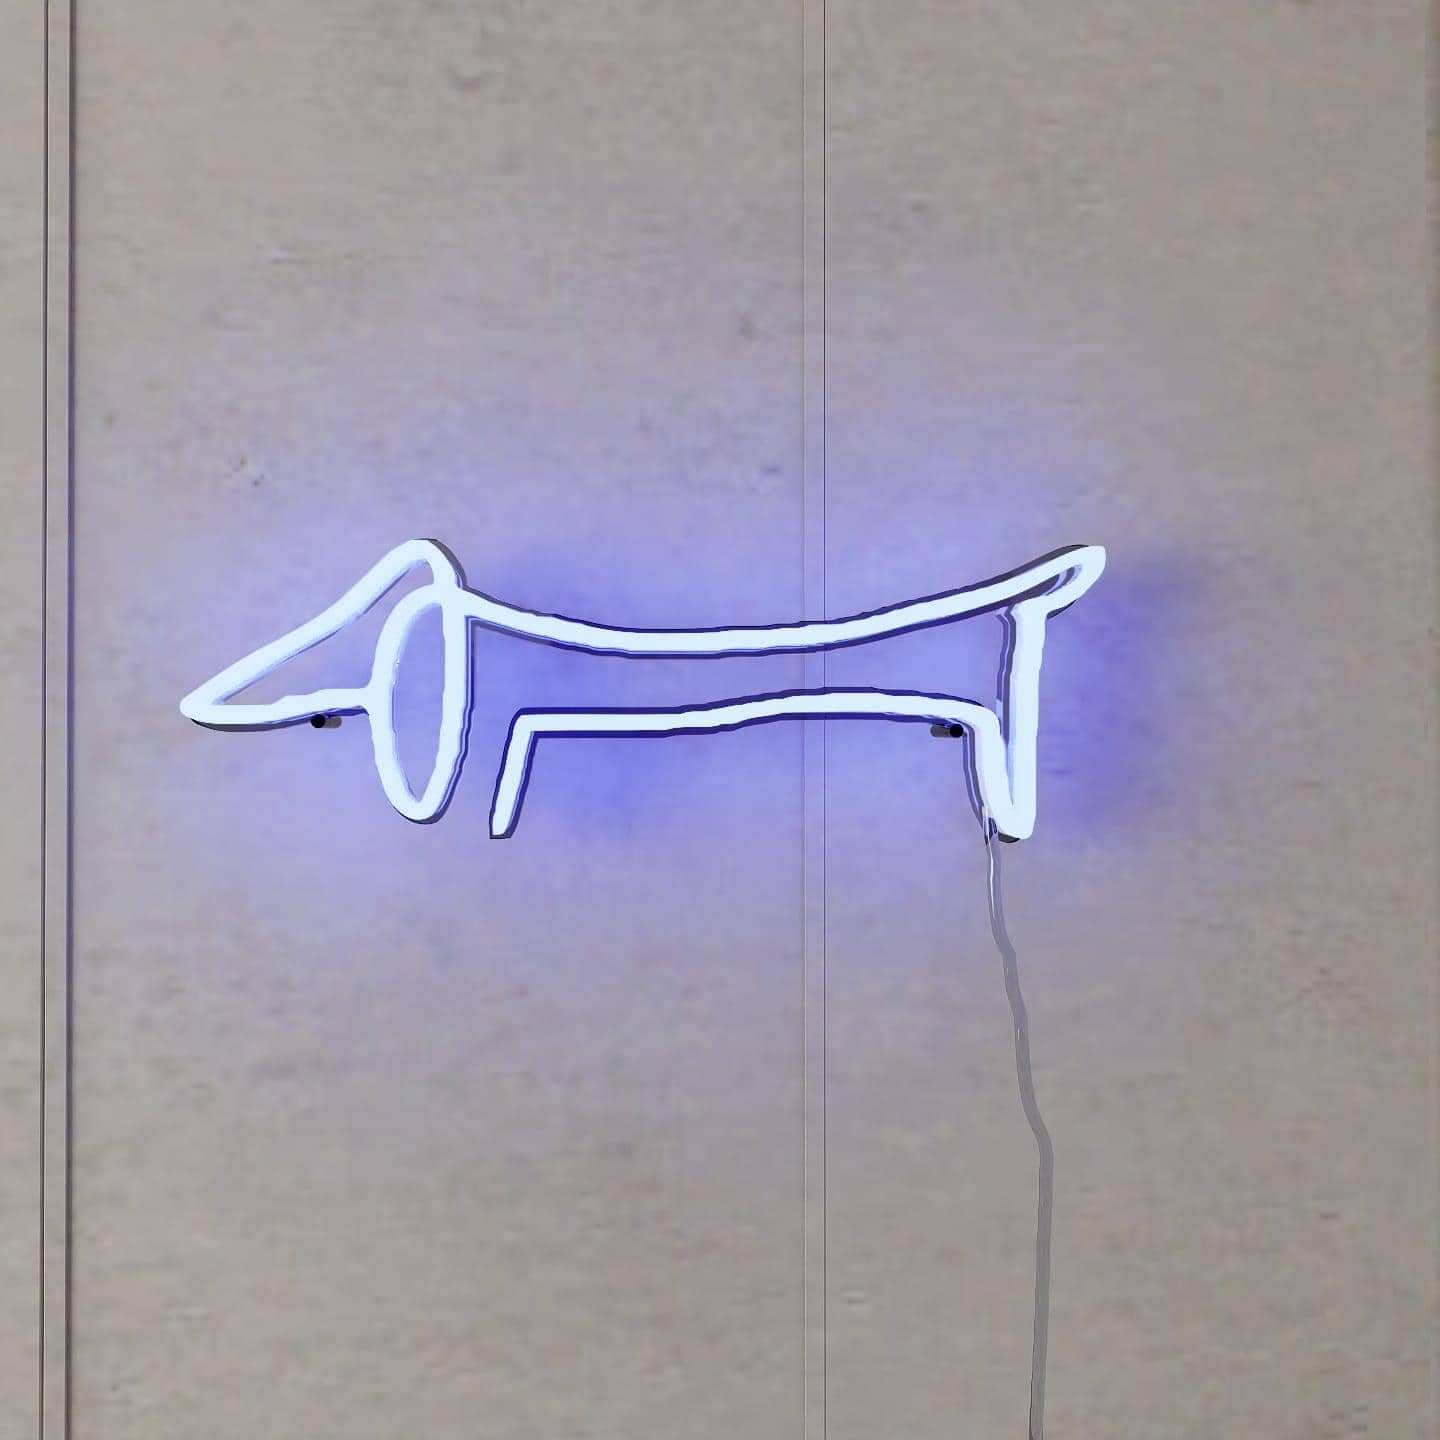 picasso-sketch-of-dachshund-hanging-on-wall-display-illuminated-at-night-blue